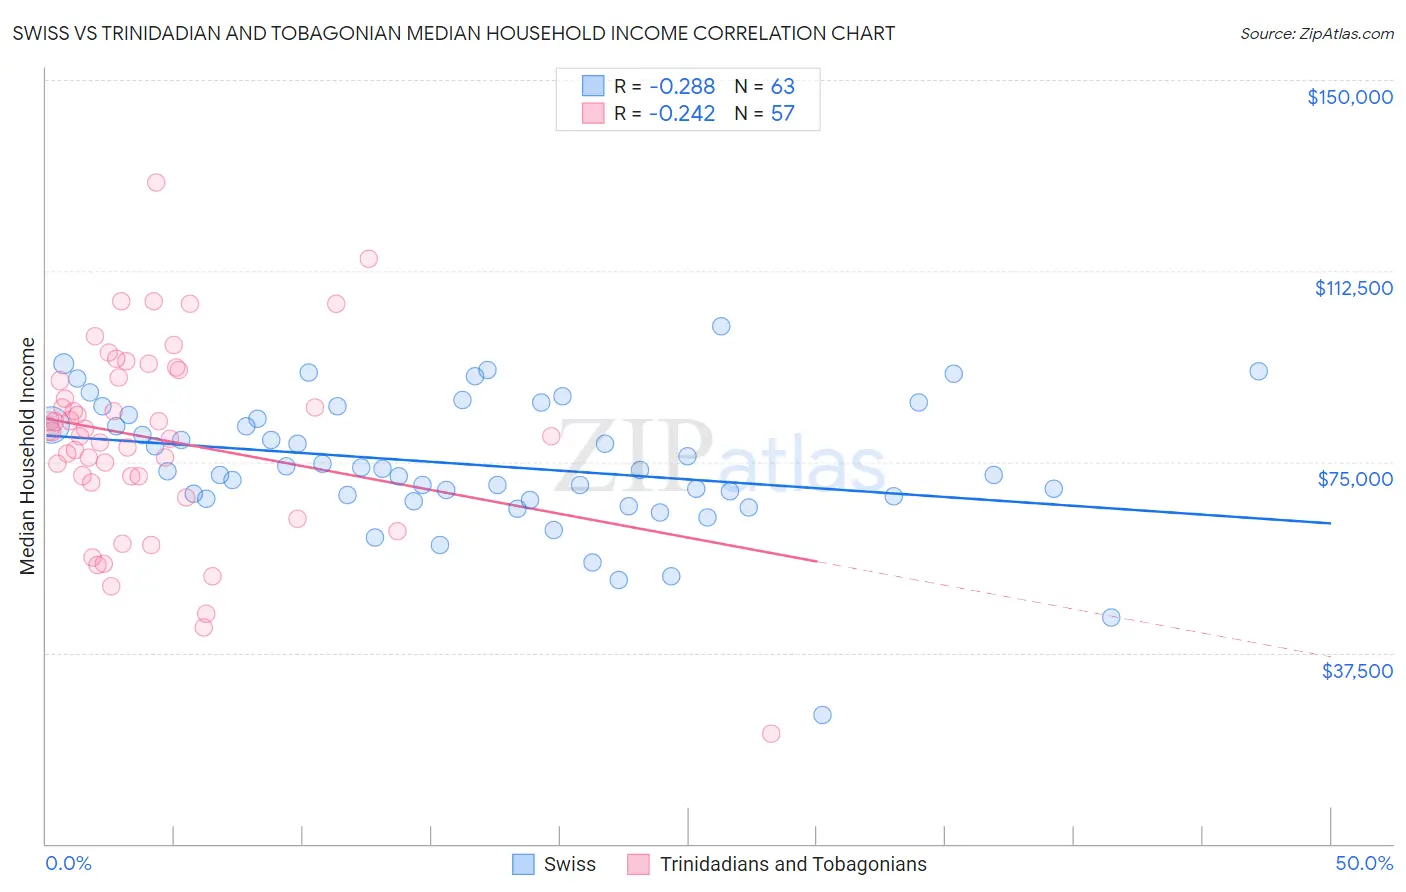 Swiss vs Trinidadian and Tobagonian Median Household Income